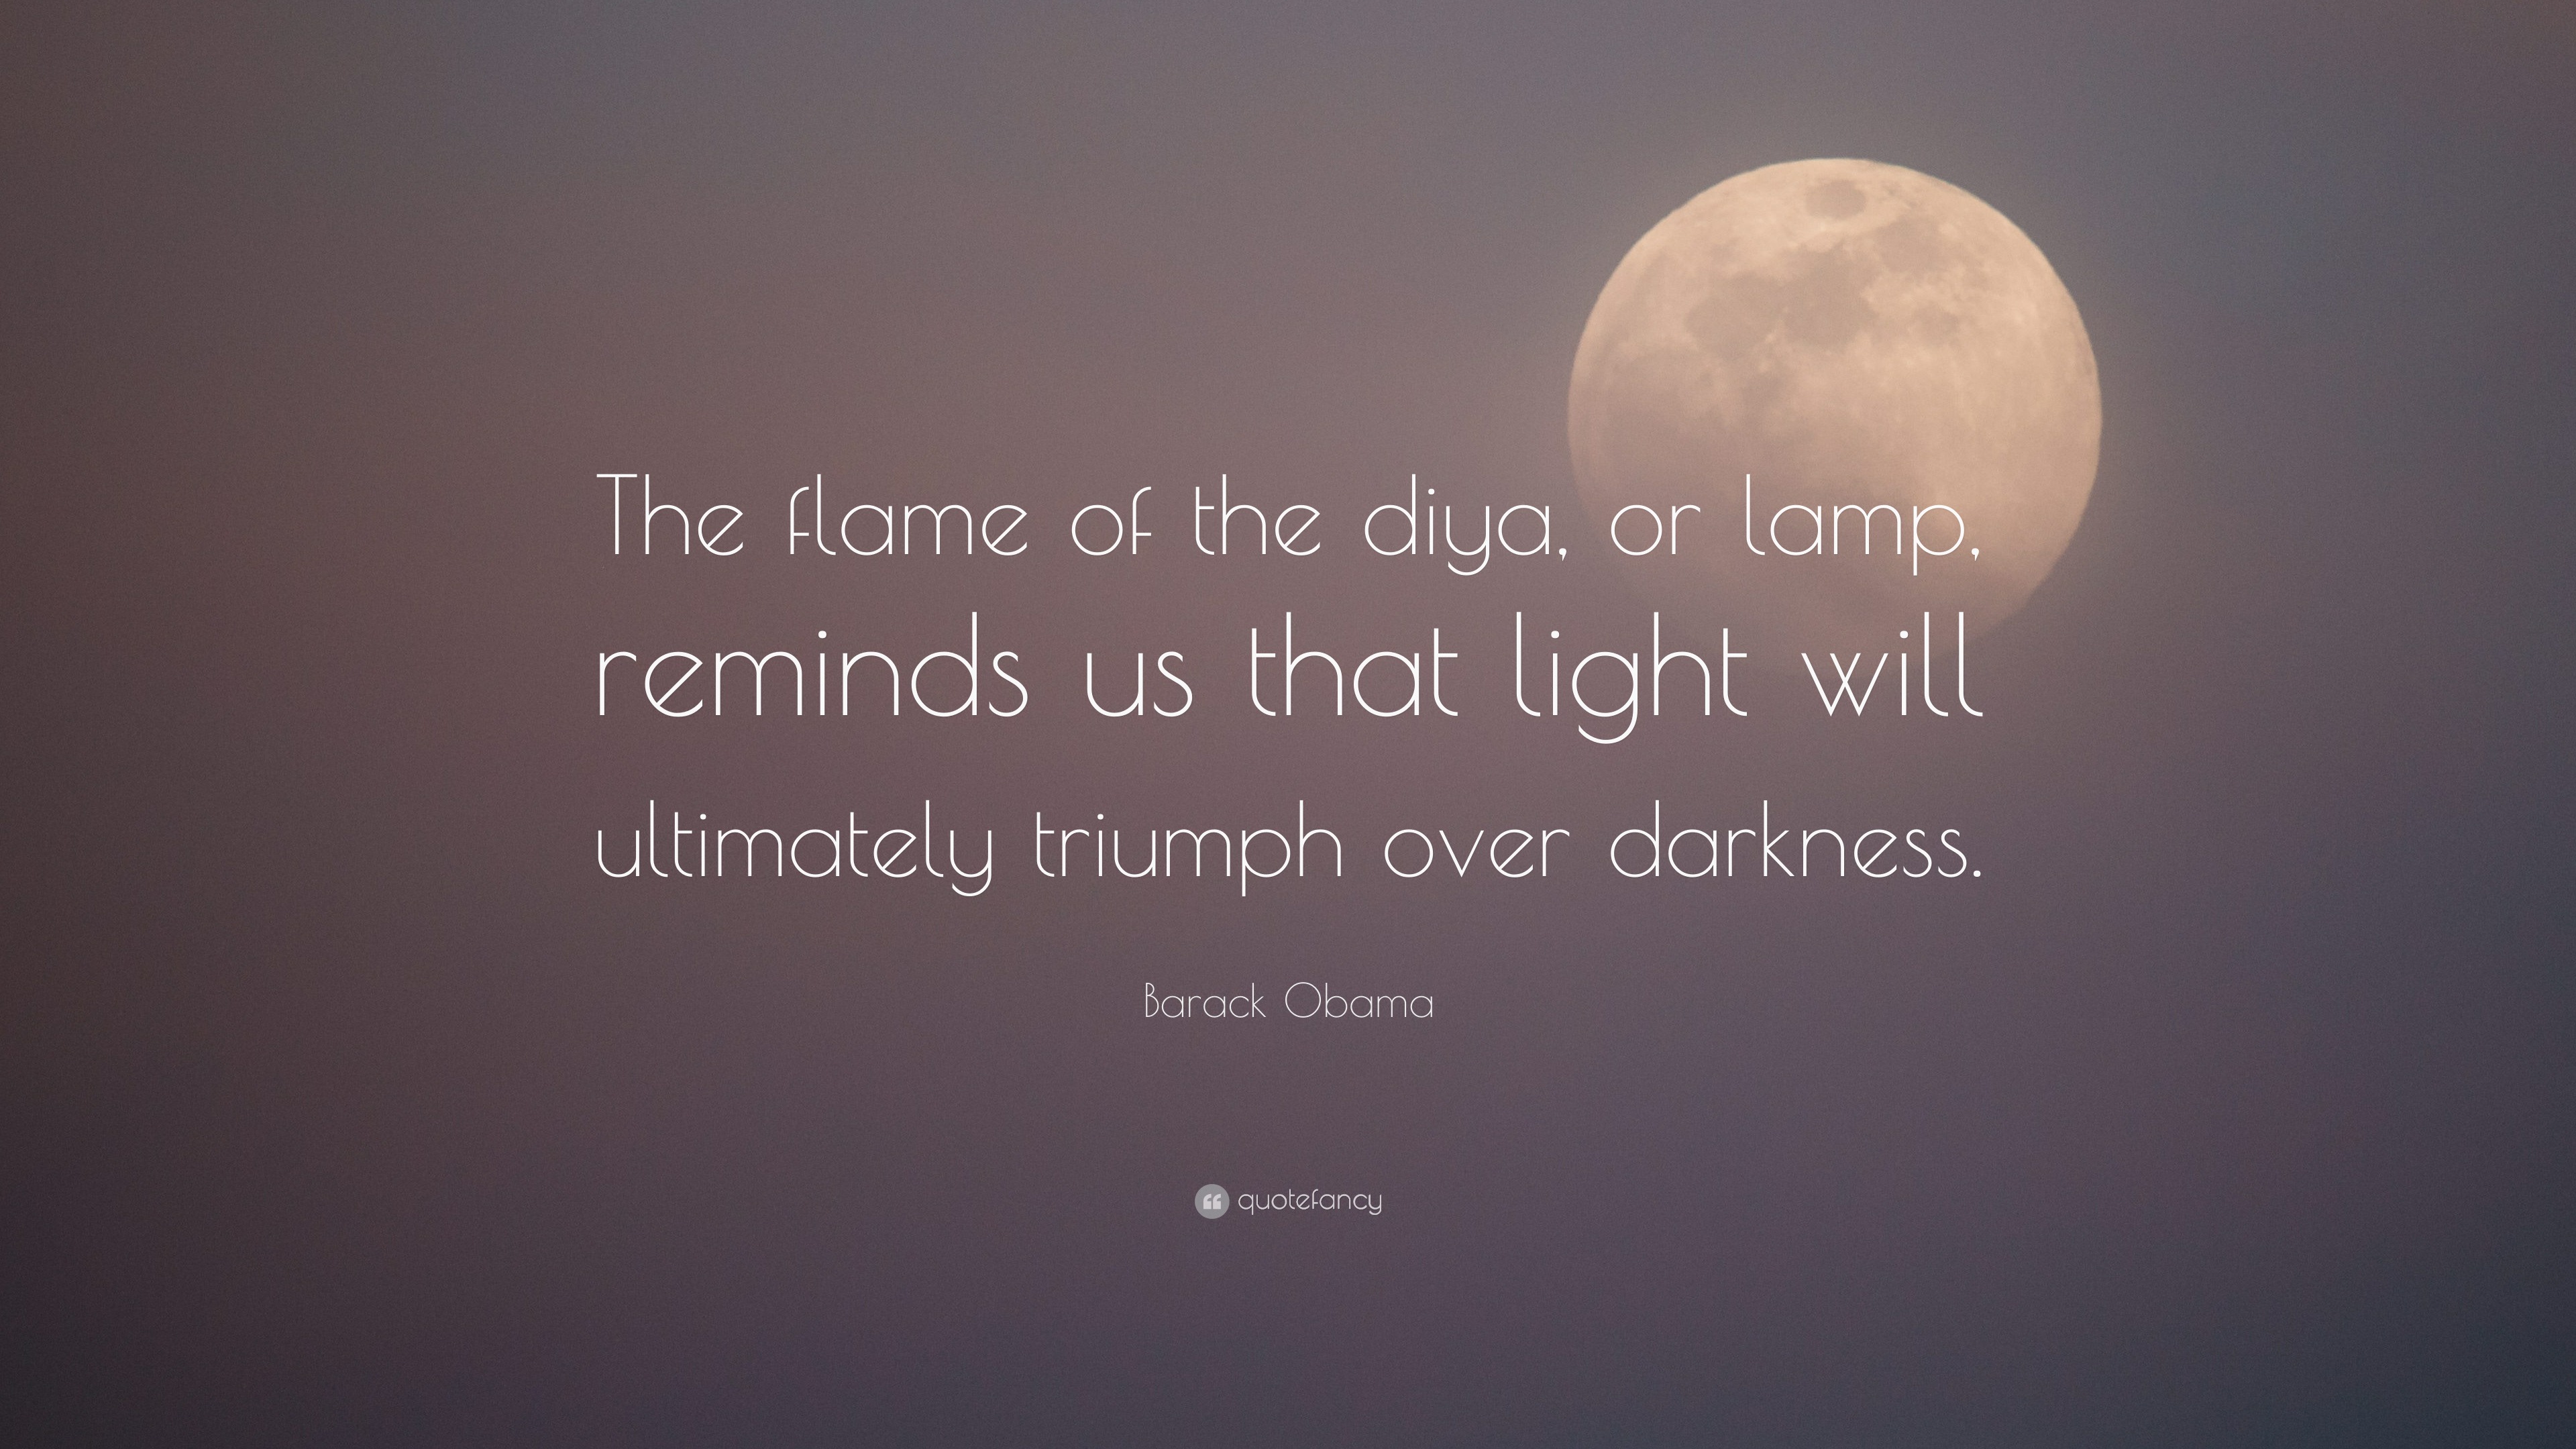 Barack Obama Quote: “The flame of the diya, or lamp, reminds us that ...